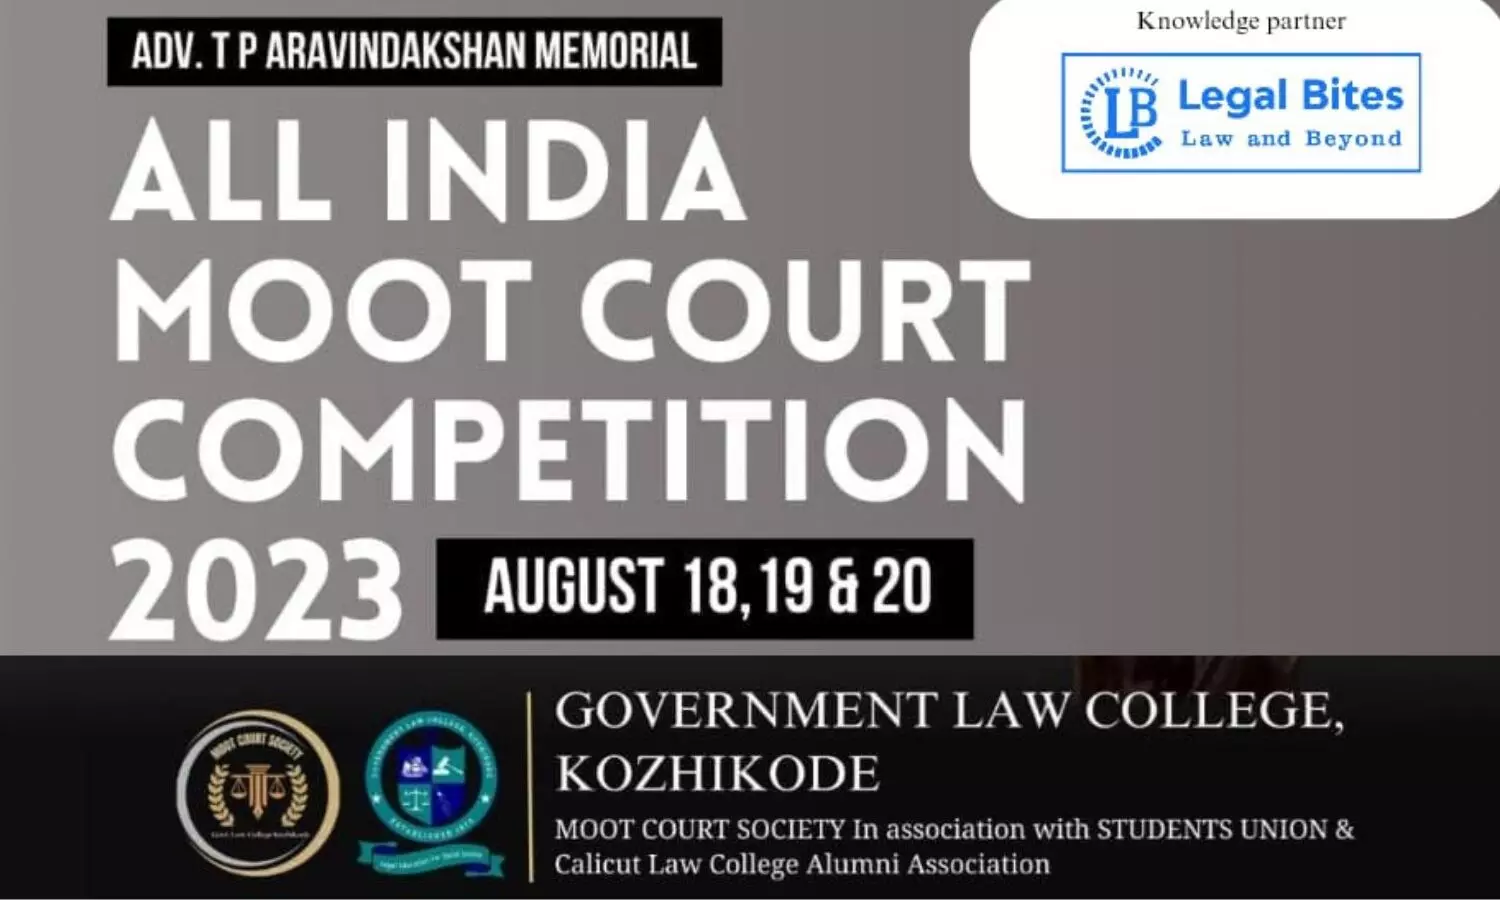 Adv T P Aravindakshan Memorial All India Moot Competition 2023 Government Law College, Kozhikode [Prizes worth 80k]